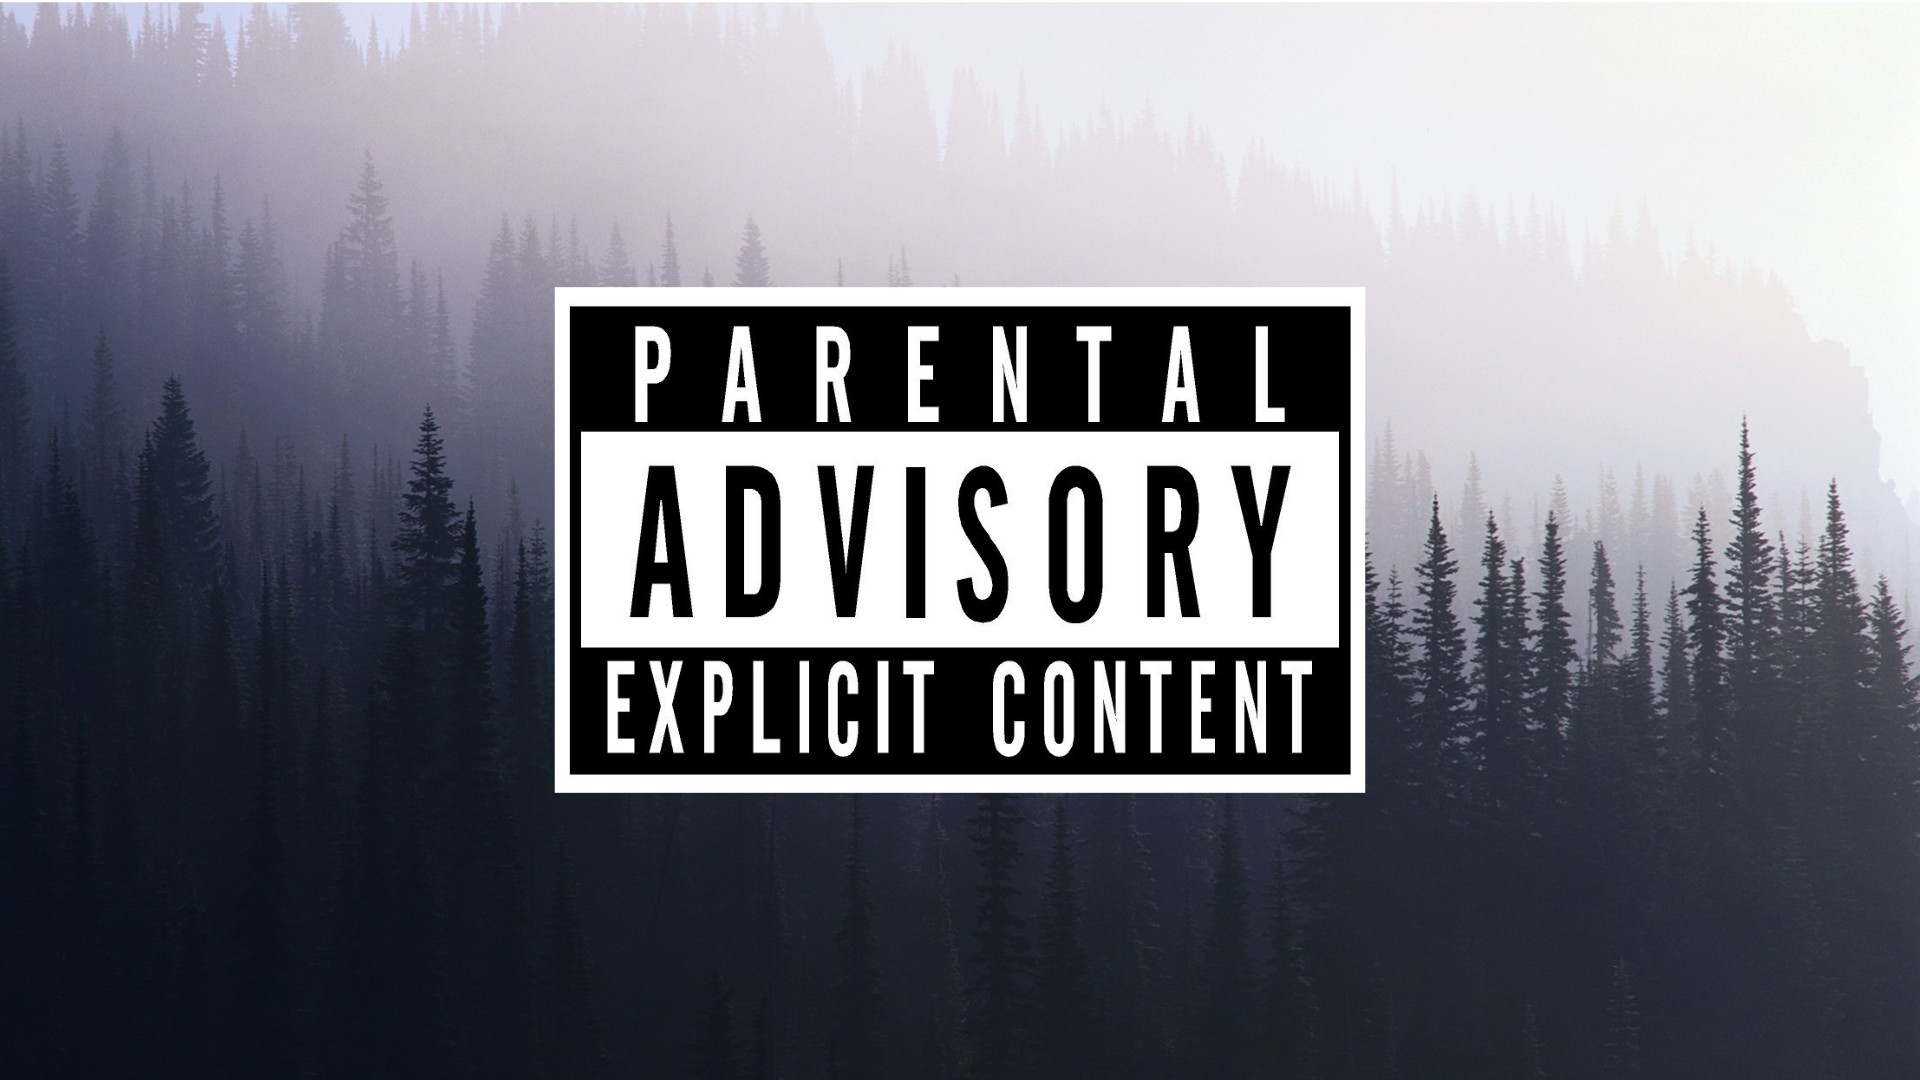 Parental Advisory Wallpapers 13 Images Business Category Similar vector logos to parental advisory explicit content. parental advisory wallpapers 13 images